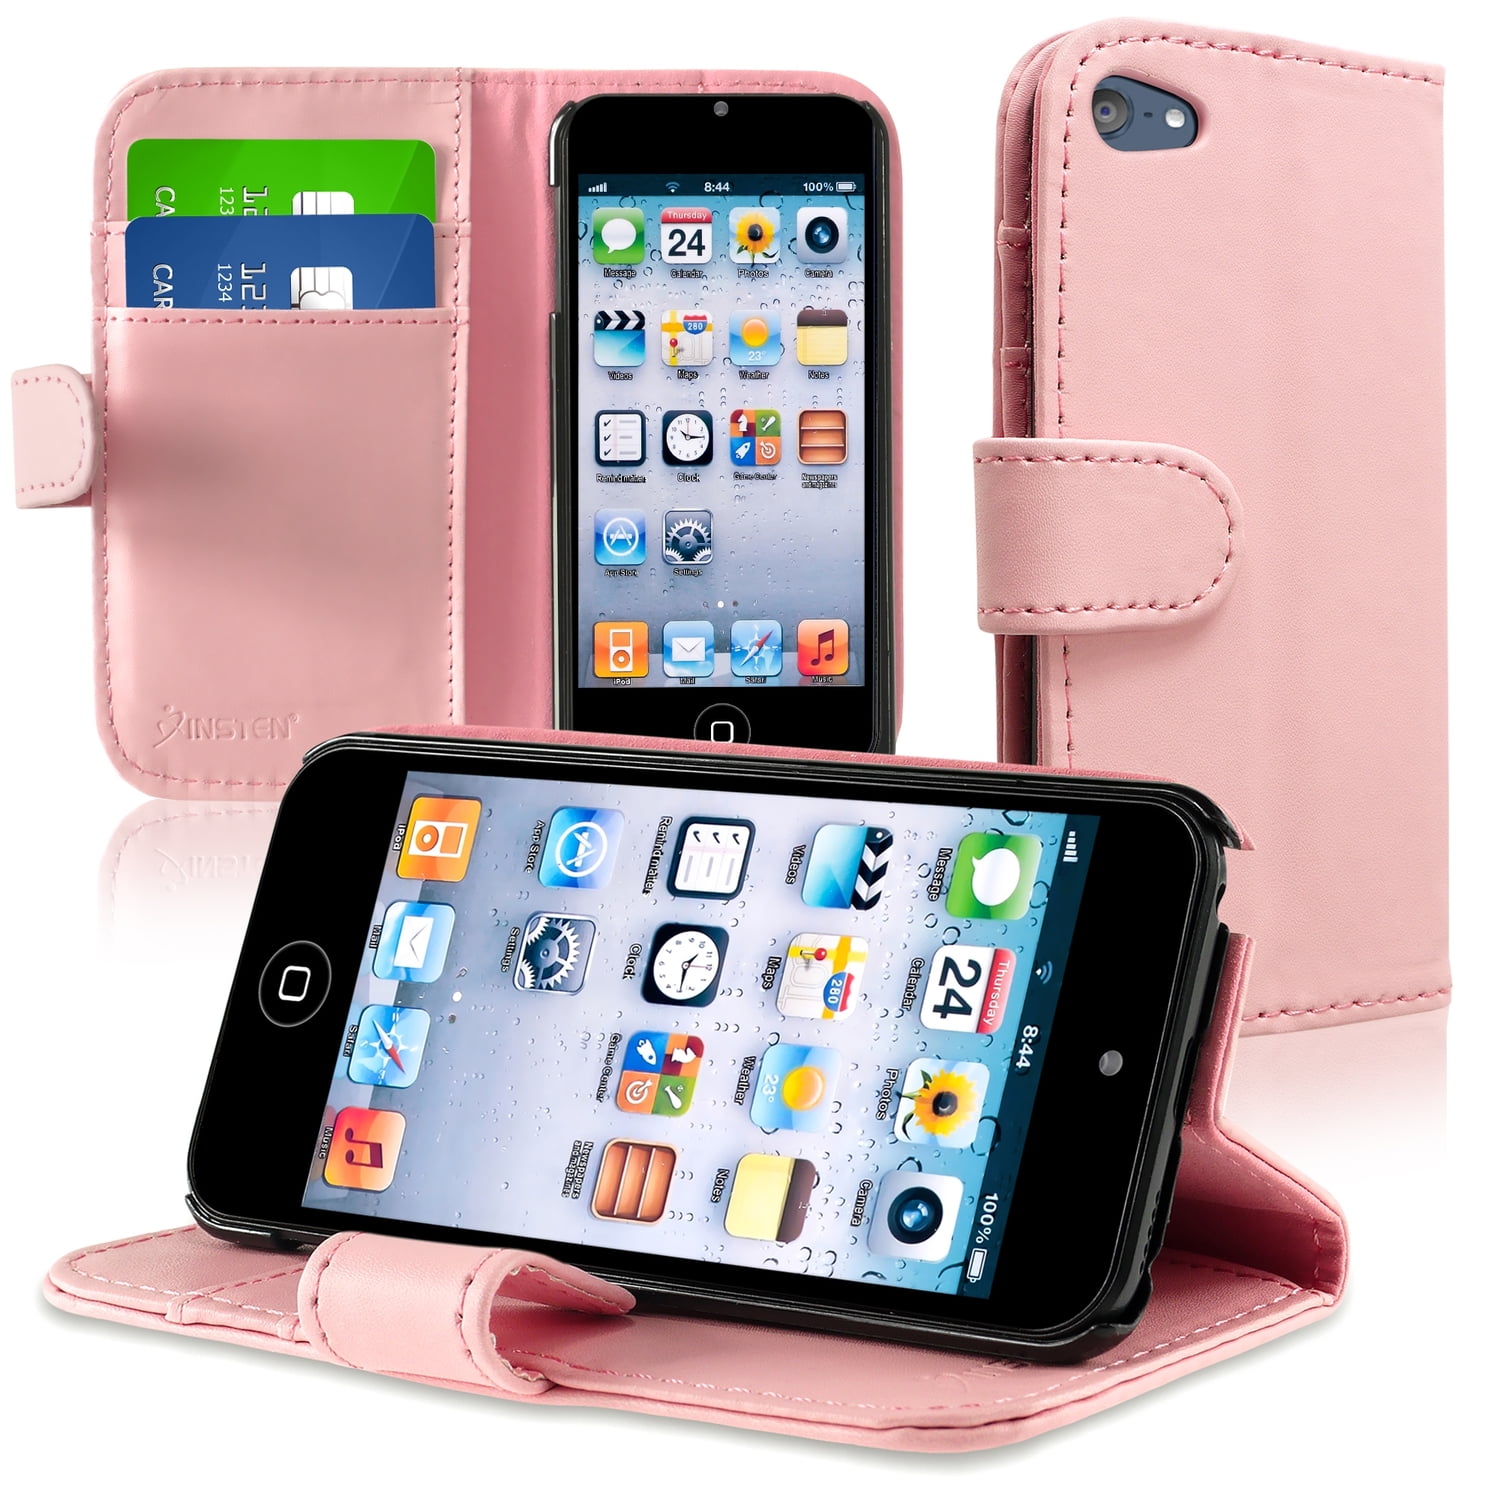 does a coque iphone 6 fit a ipod touch 6th generation